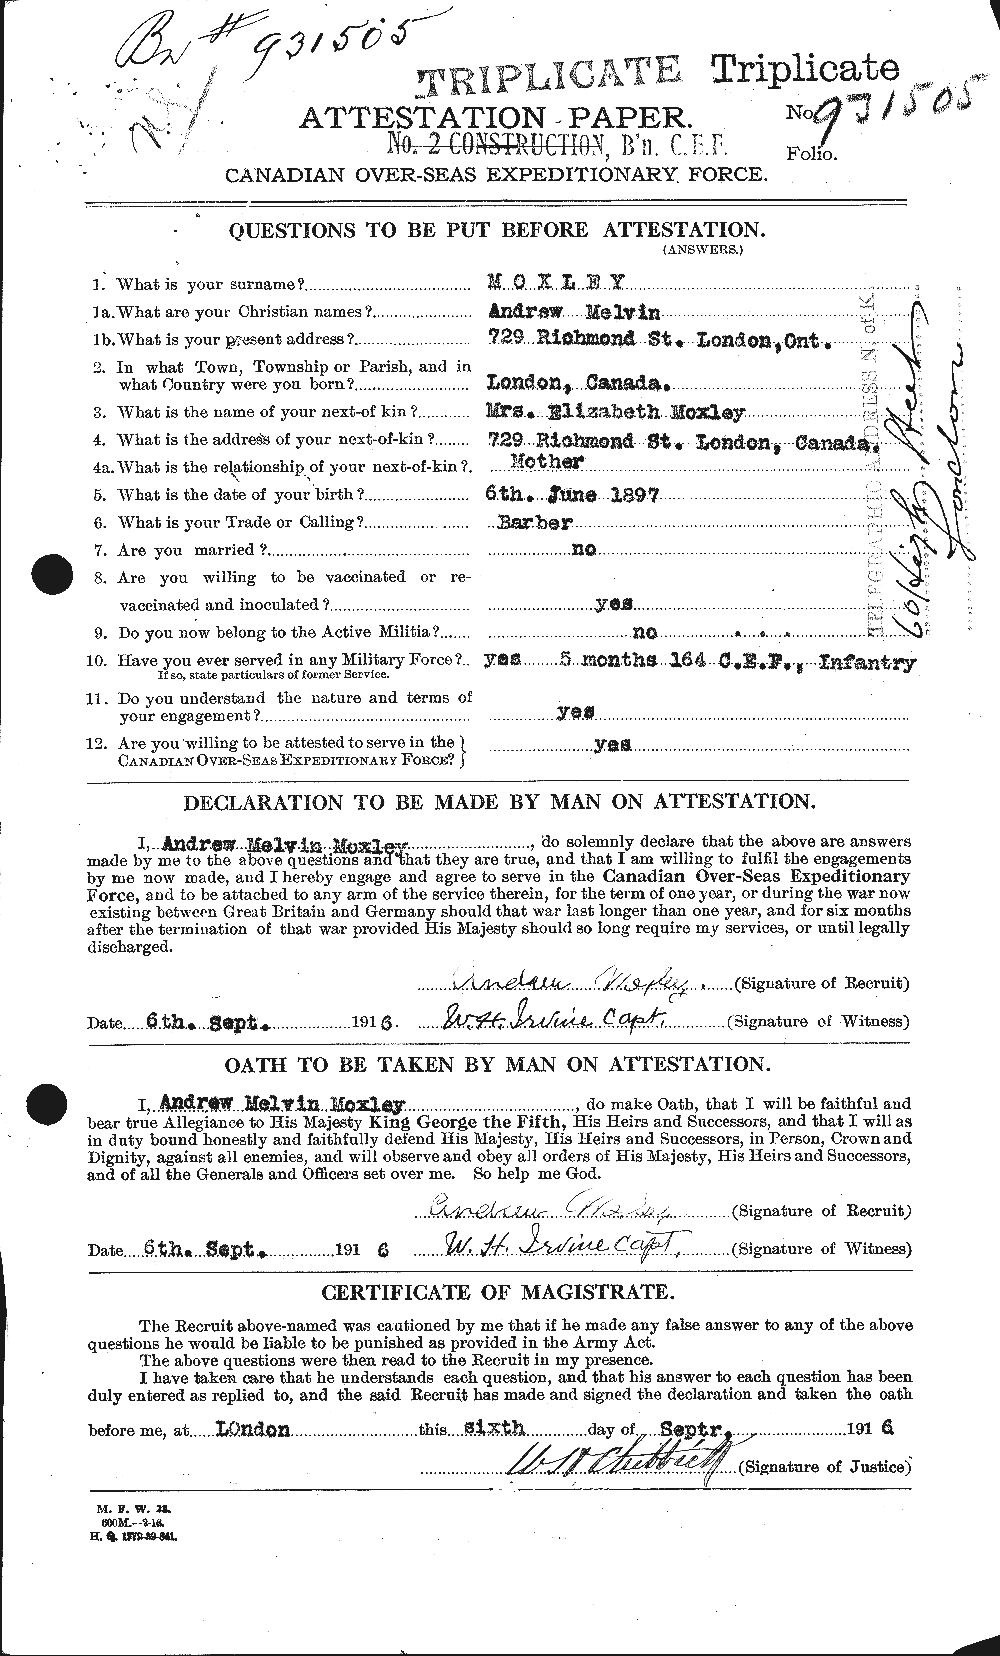 Personnel Records of the First World War - CEF 510585a